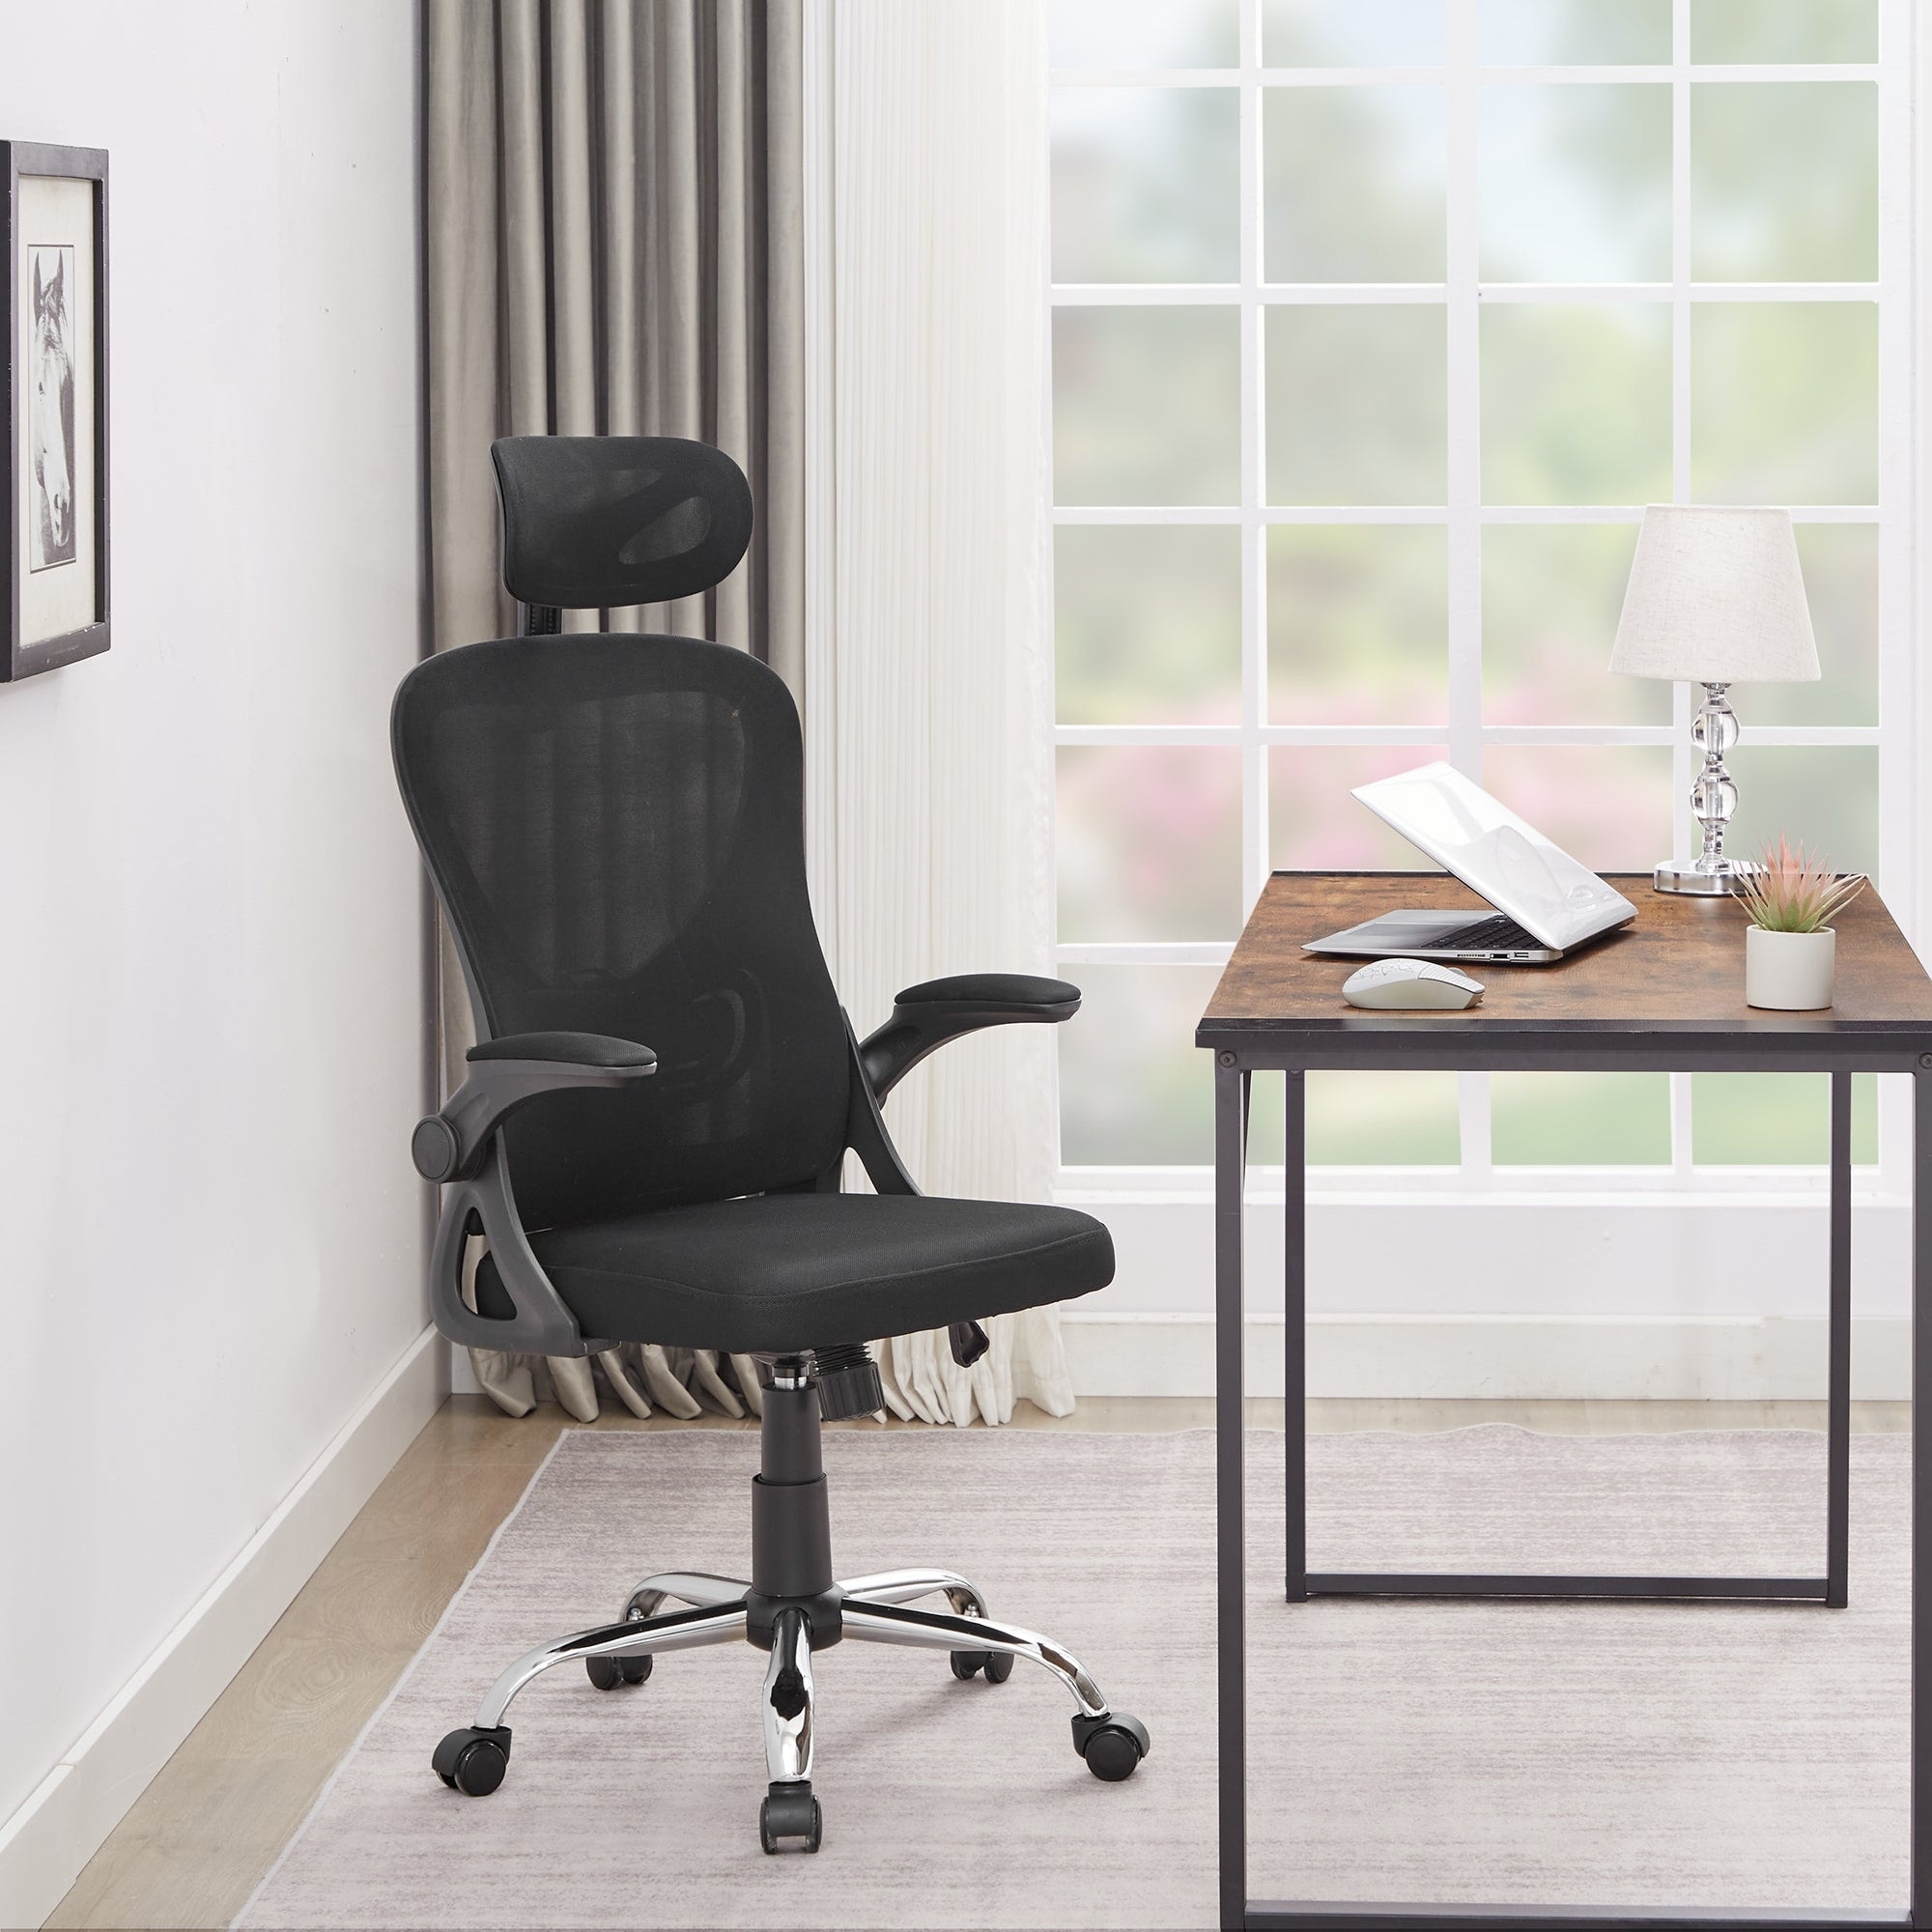 https://ak1.ostkcdn.com/images/products/is/images/direct/3525688f3f59a251771d43909156ce041ff4895b/VECELO-High-Back-Ergonomic-Office-Chair-with-Adjustable-Headrest-Armrest-Mesh-Lumbar-Support.jpg